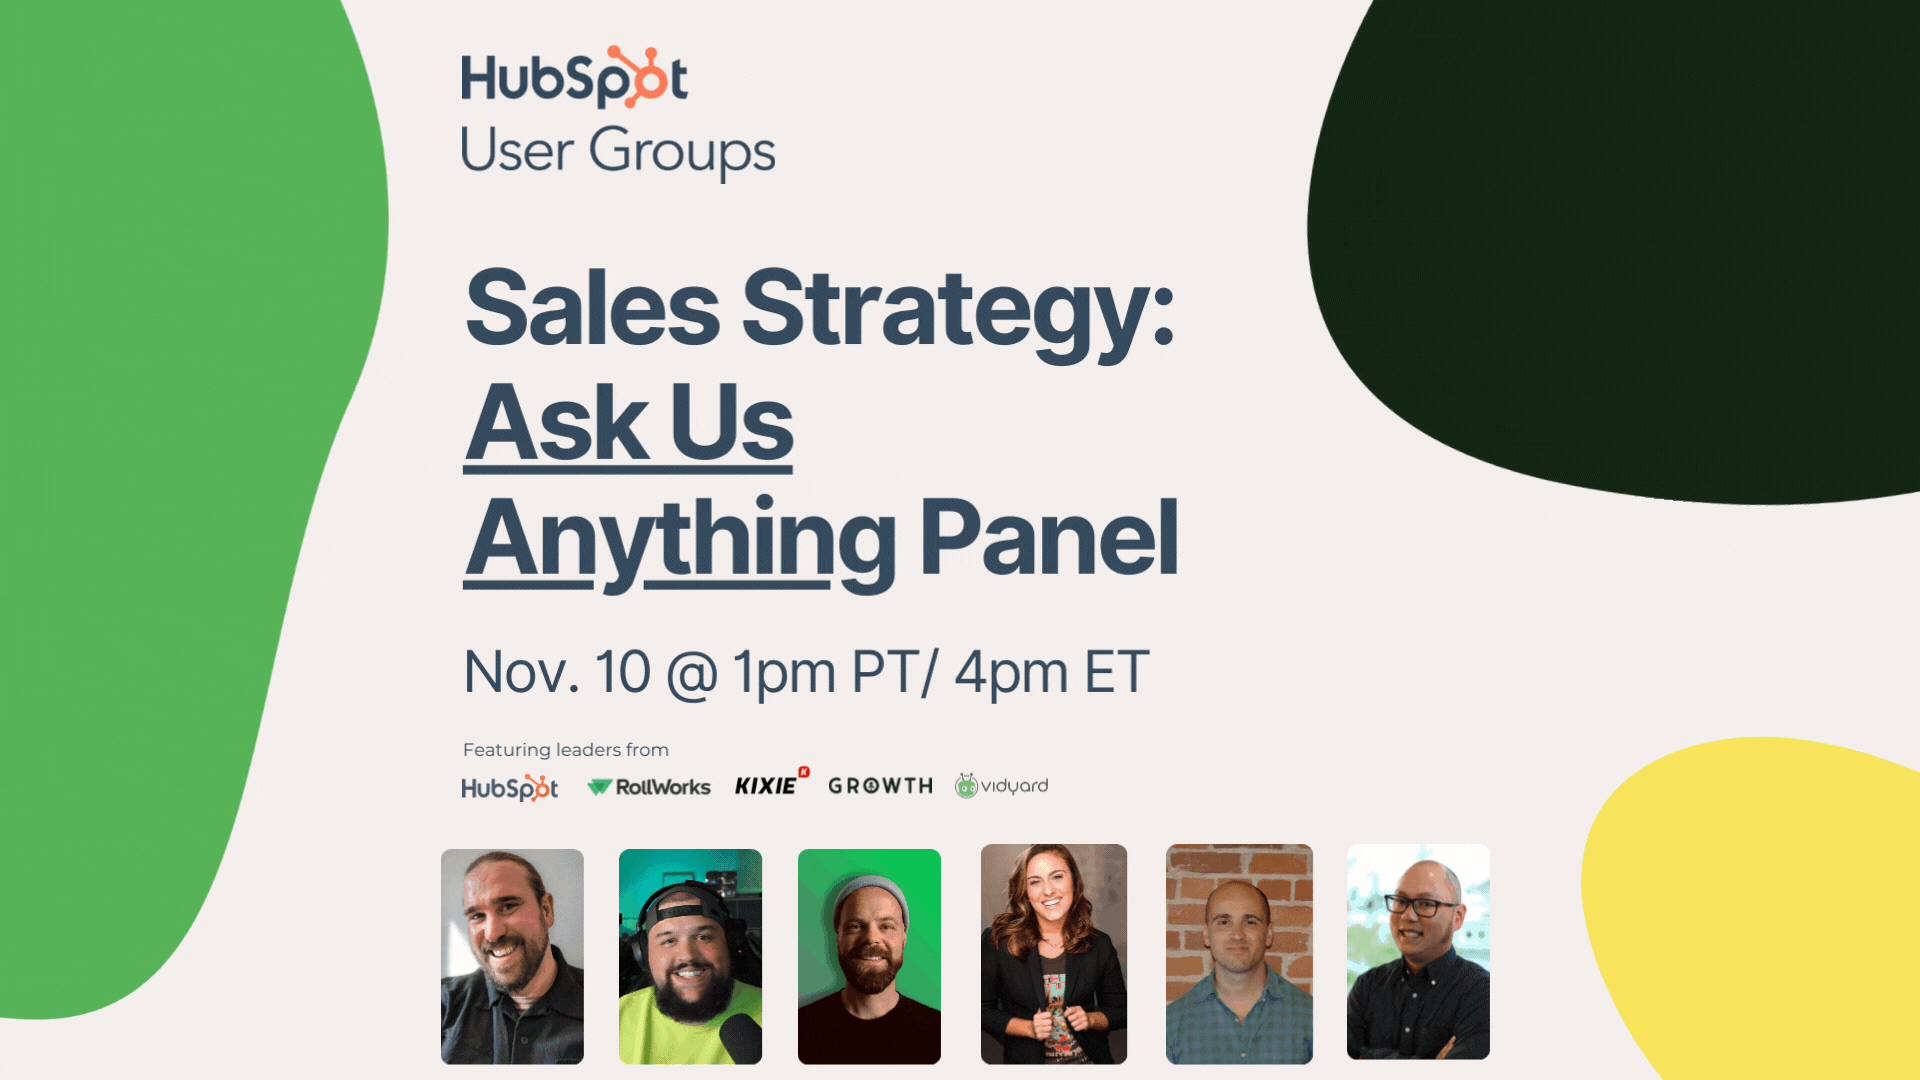 HubSpot HUG Event: Ask the Sales + Marketing Software Experts Anything